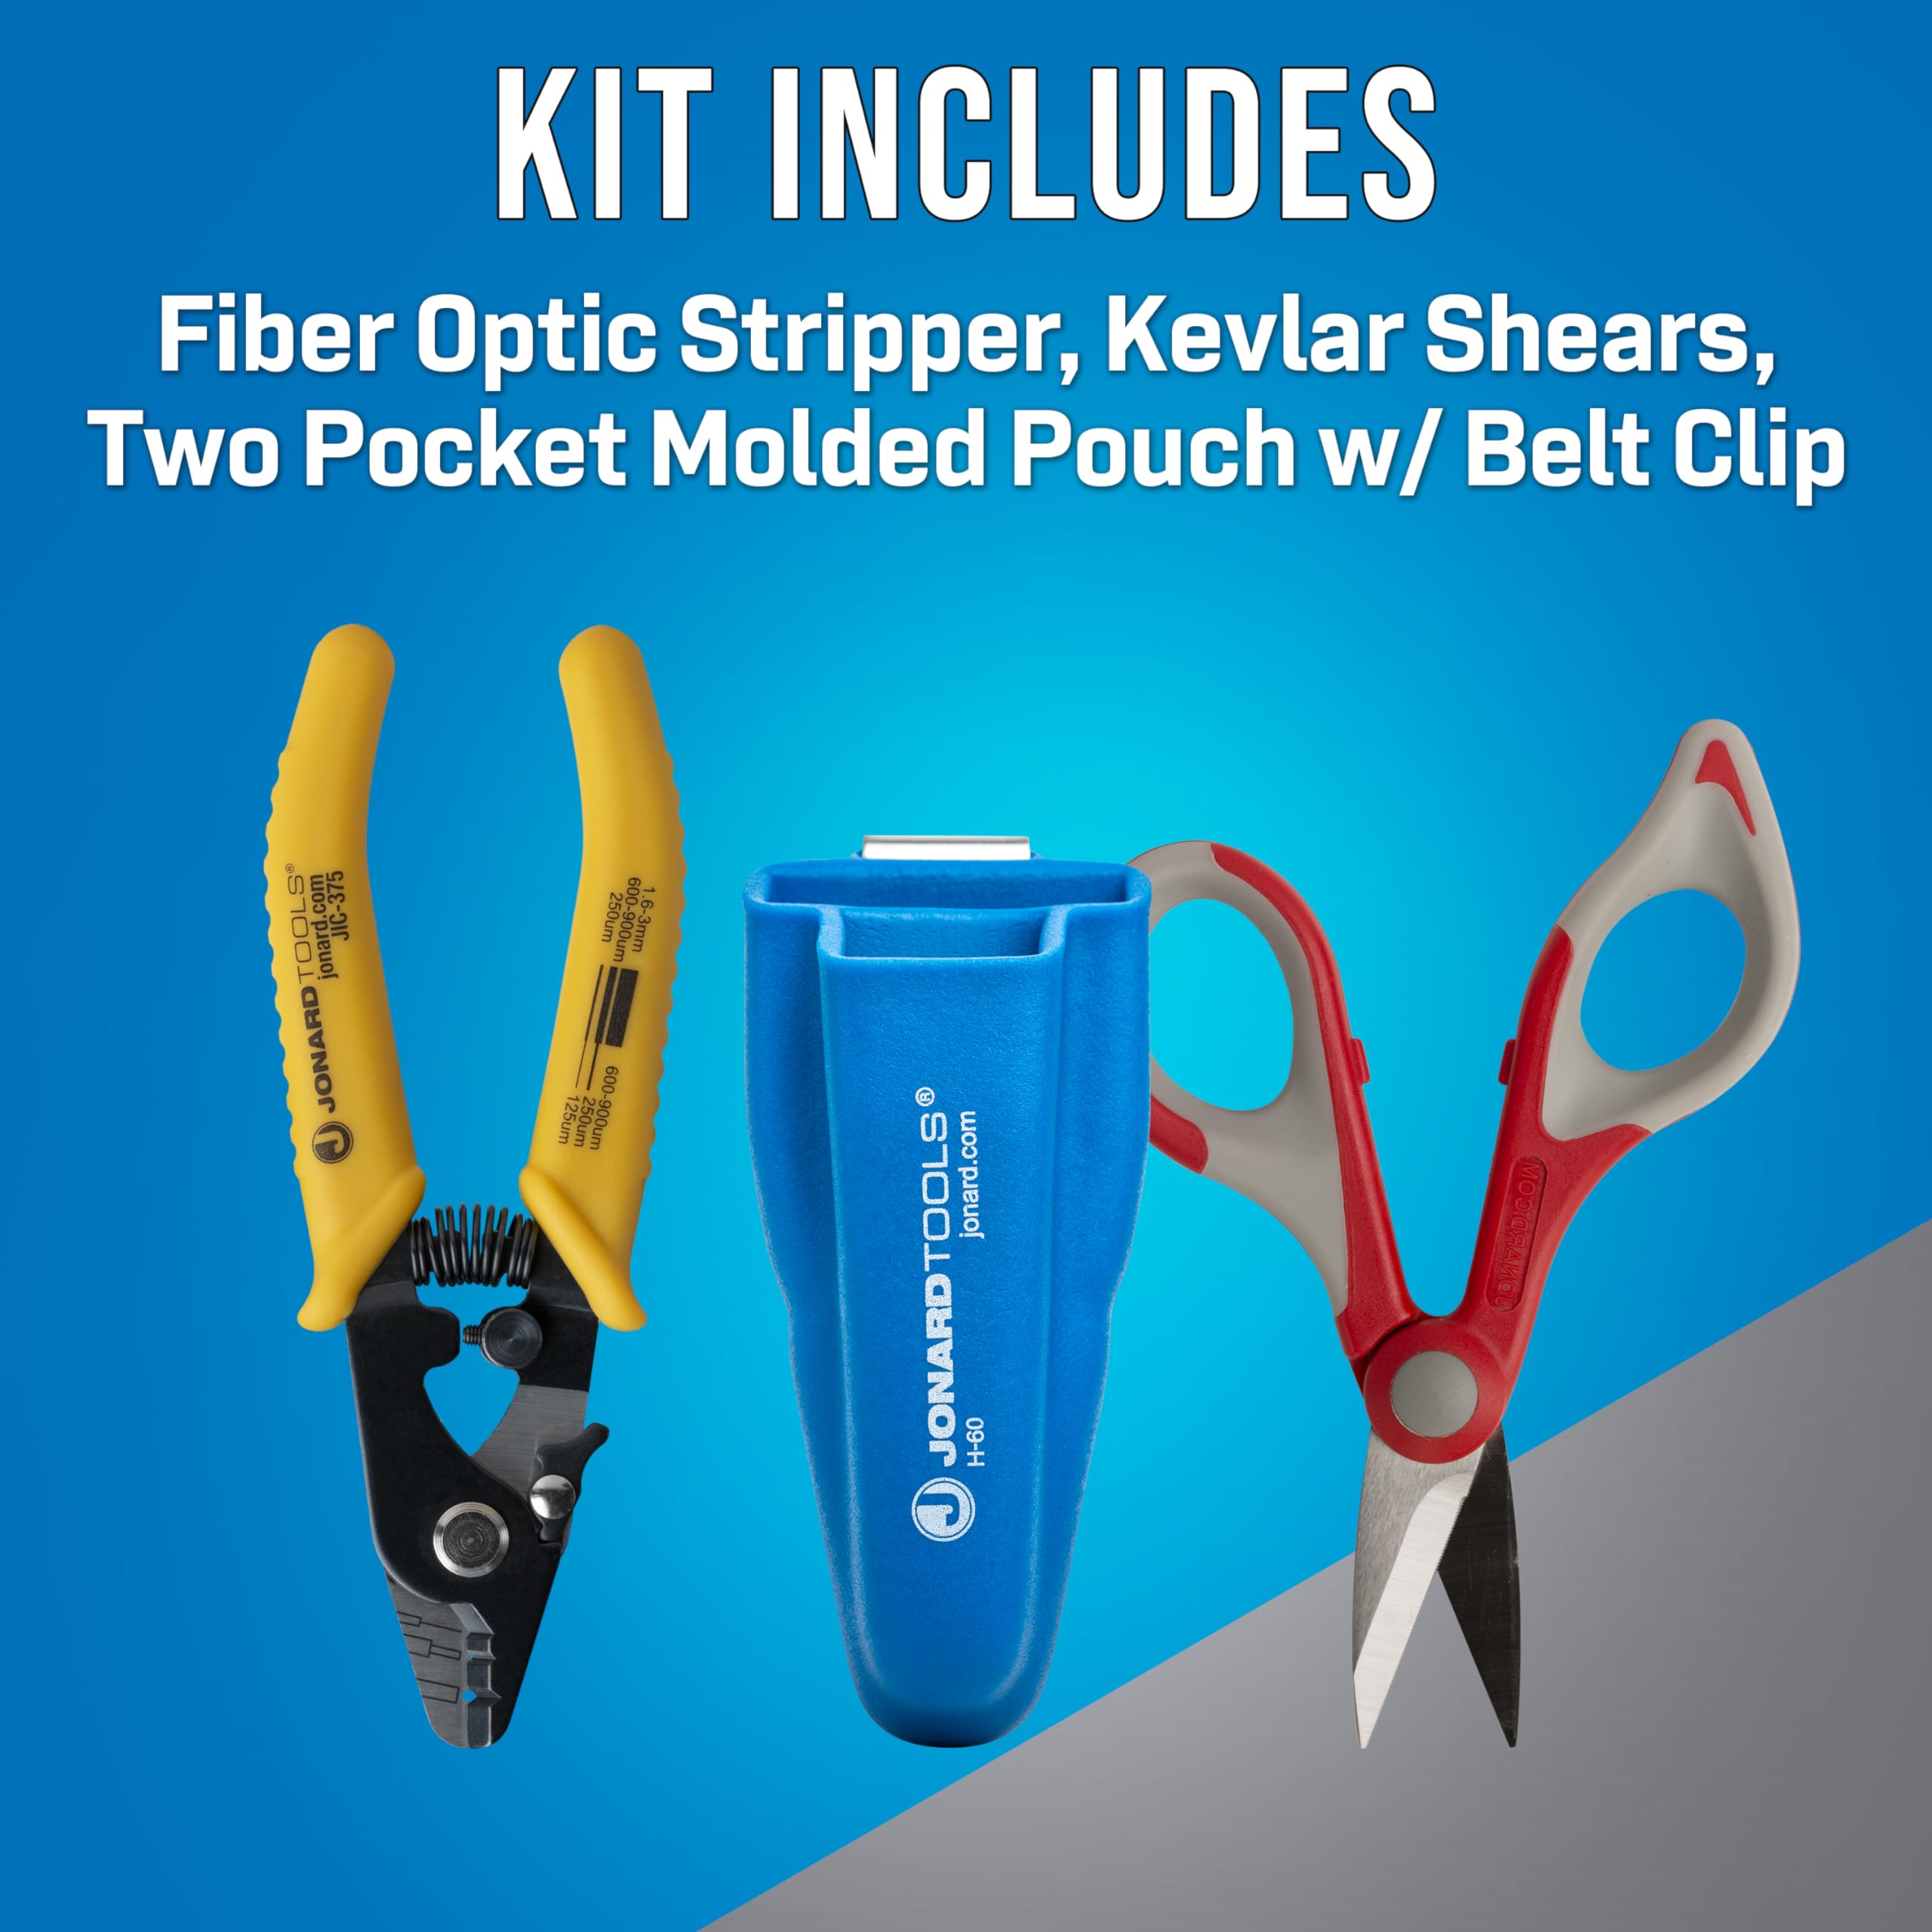 Jonard Tools TK-350 Fiber Optic Stripper & Kevlar Shears Kit – Featuring Molded Pouch to Securely Hold 3 Hole Fiber Stripper and Kevlar Cutting Shears – Ideal for Fiber Technicians